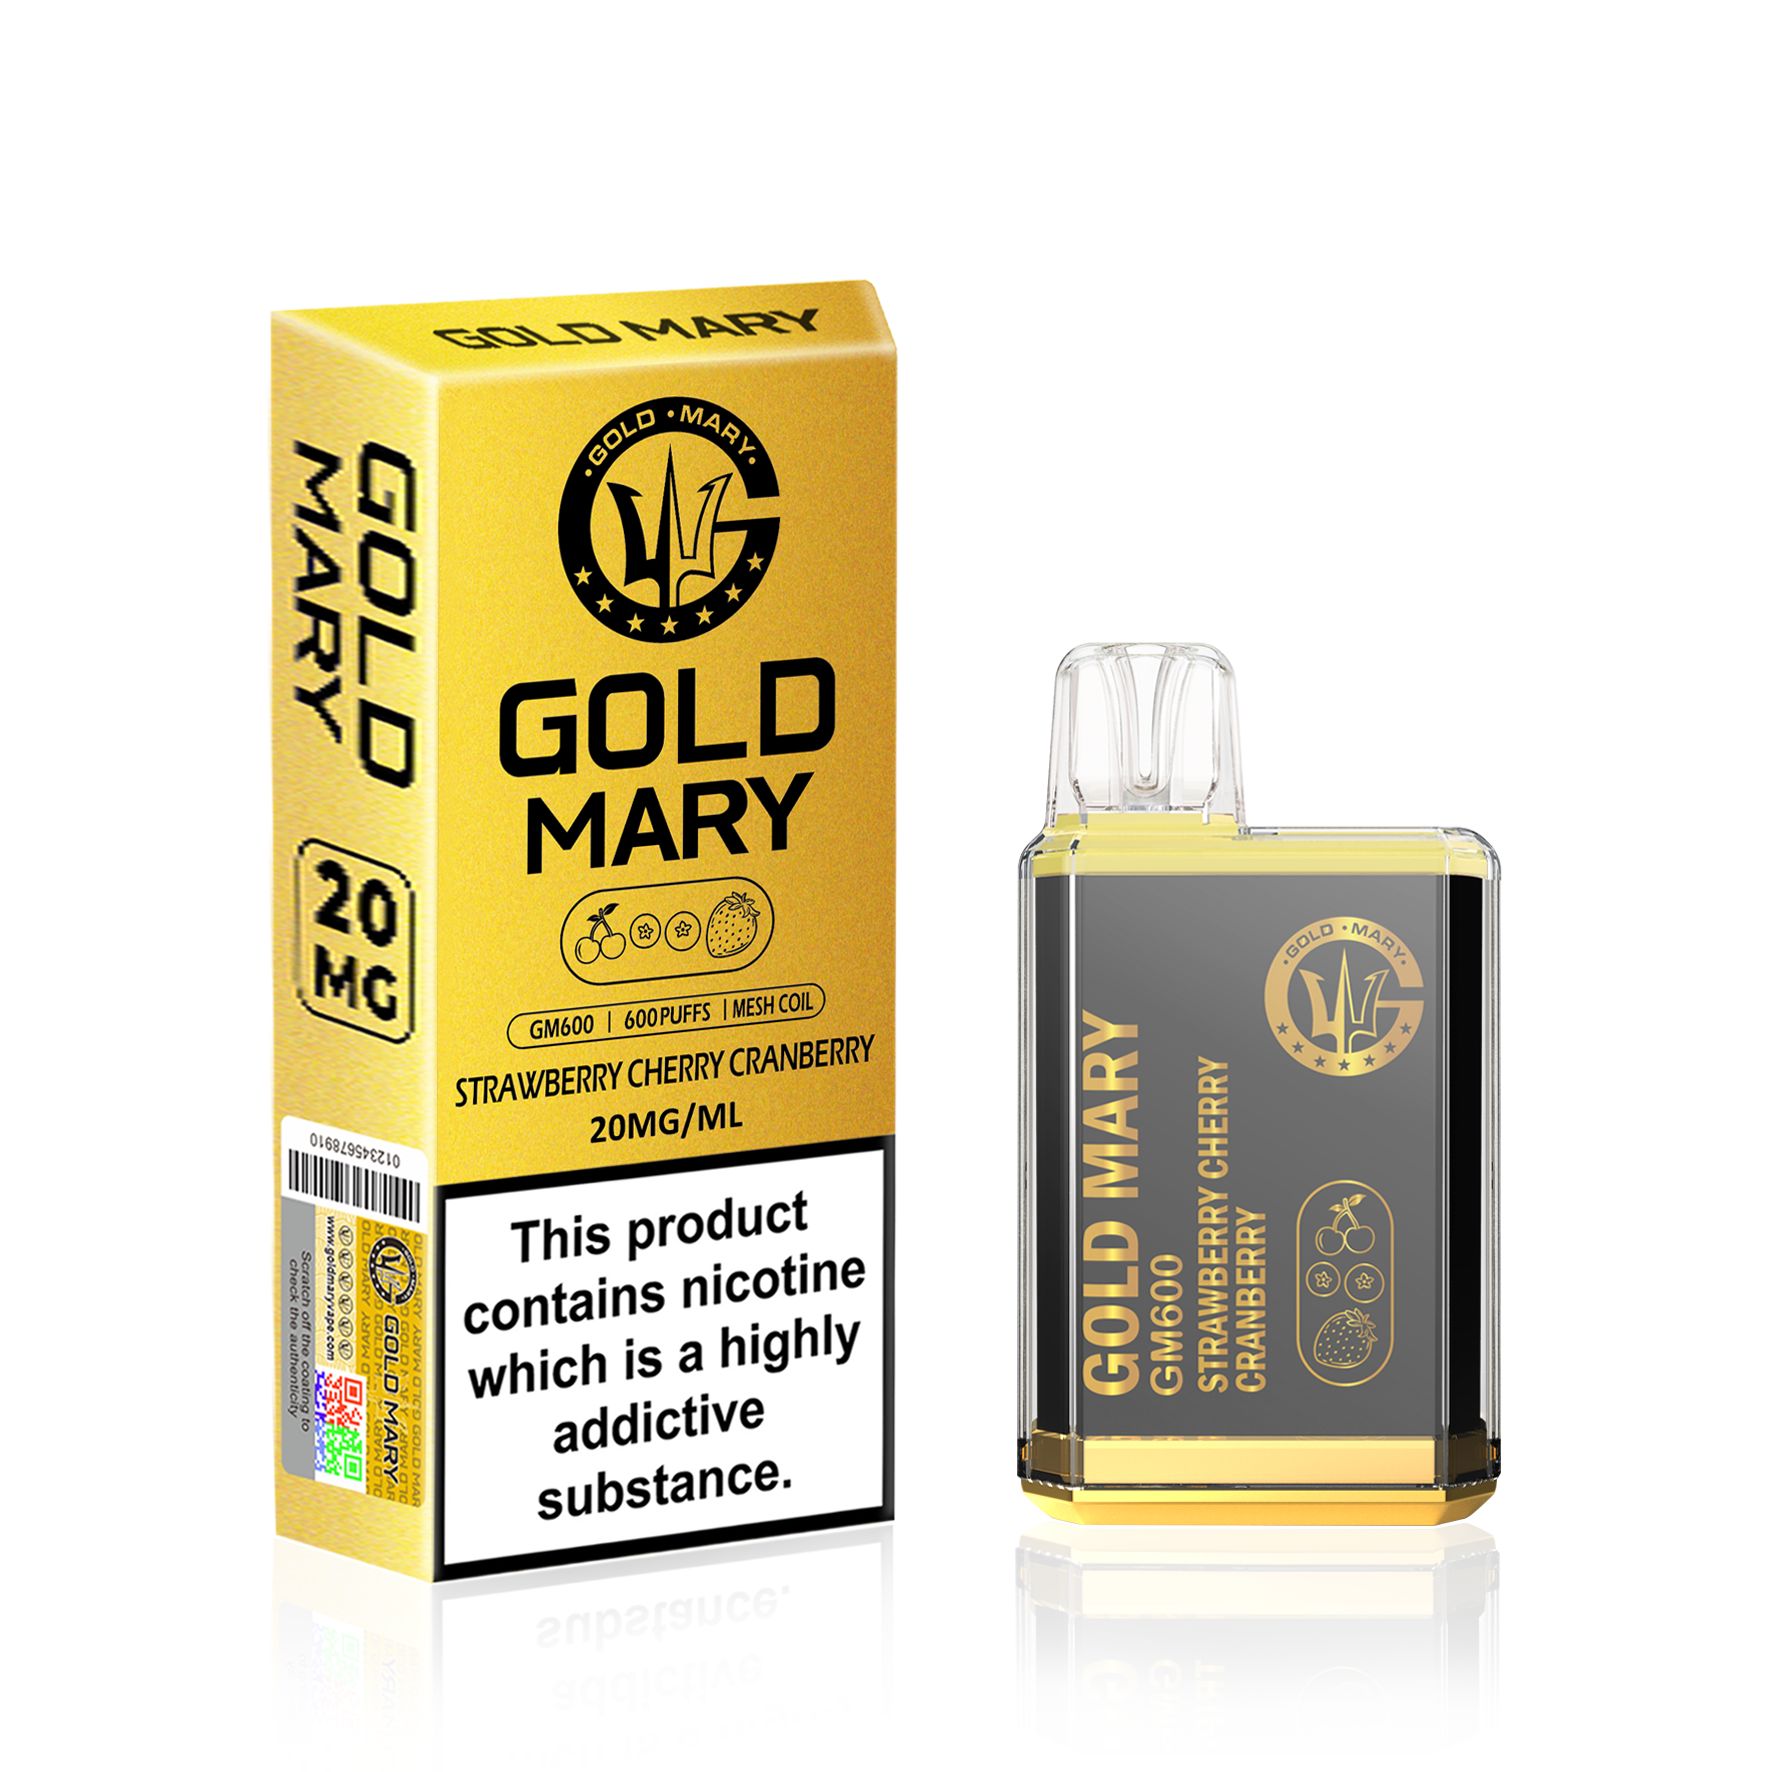 Gold Mary GM600 Disposable Vape Puff Bar Pod Device - Wolfvapes.co.uk-Strawberry Cherry Cranberry